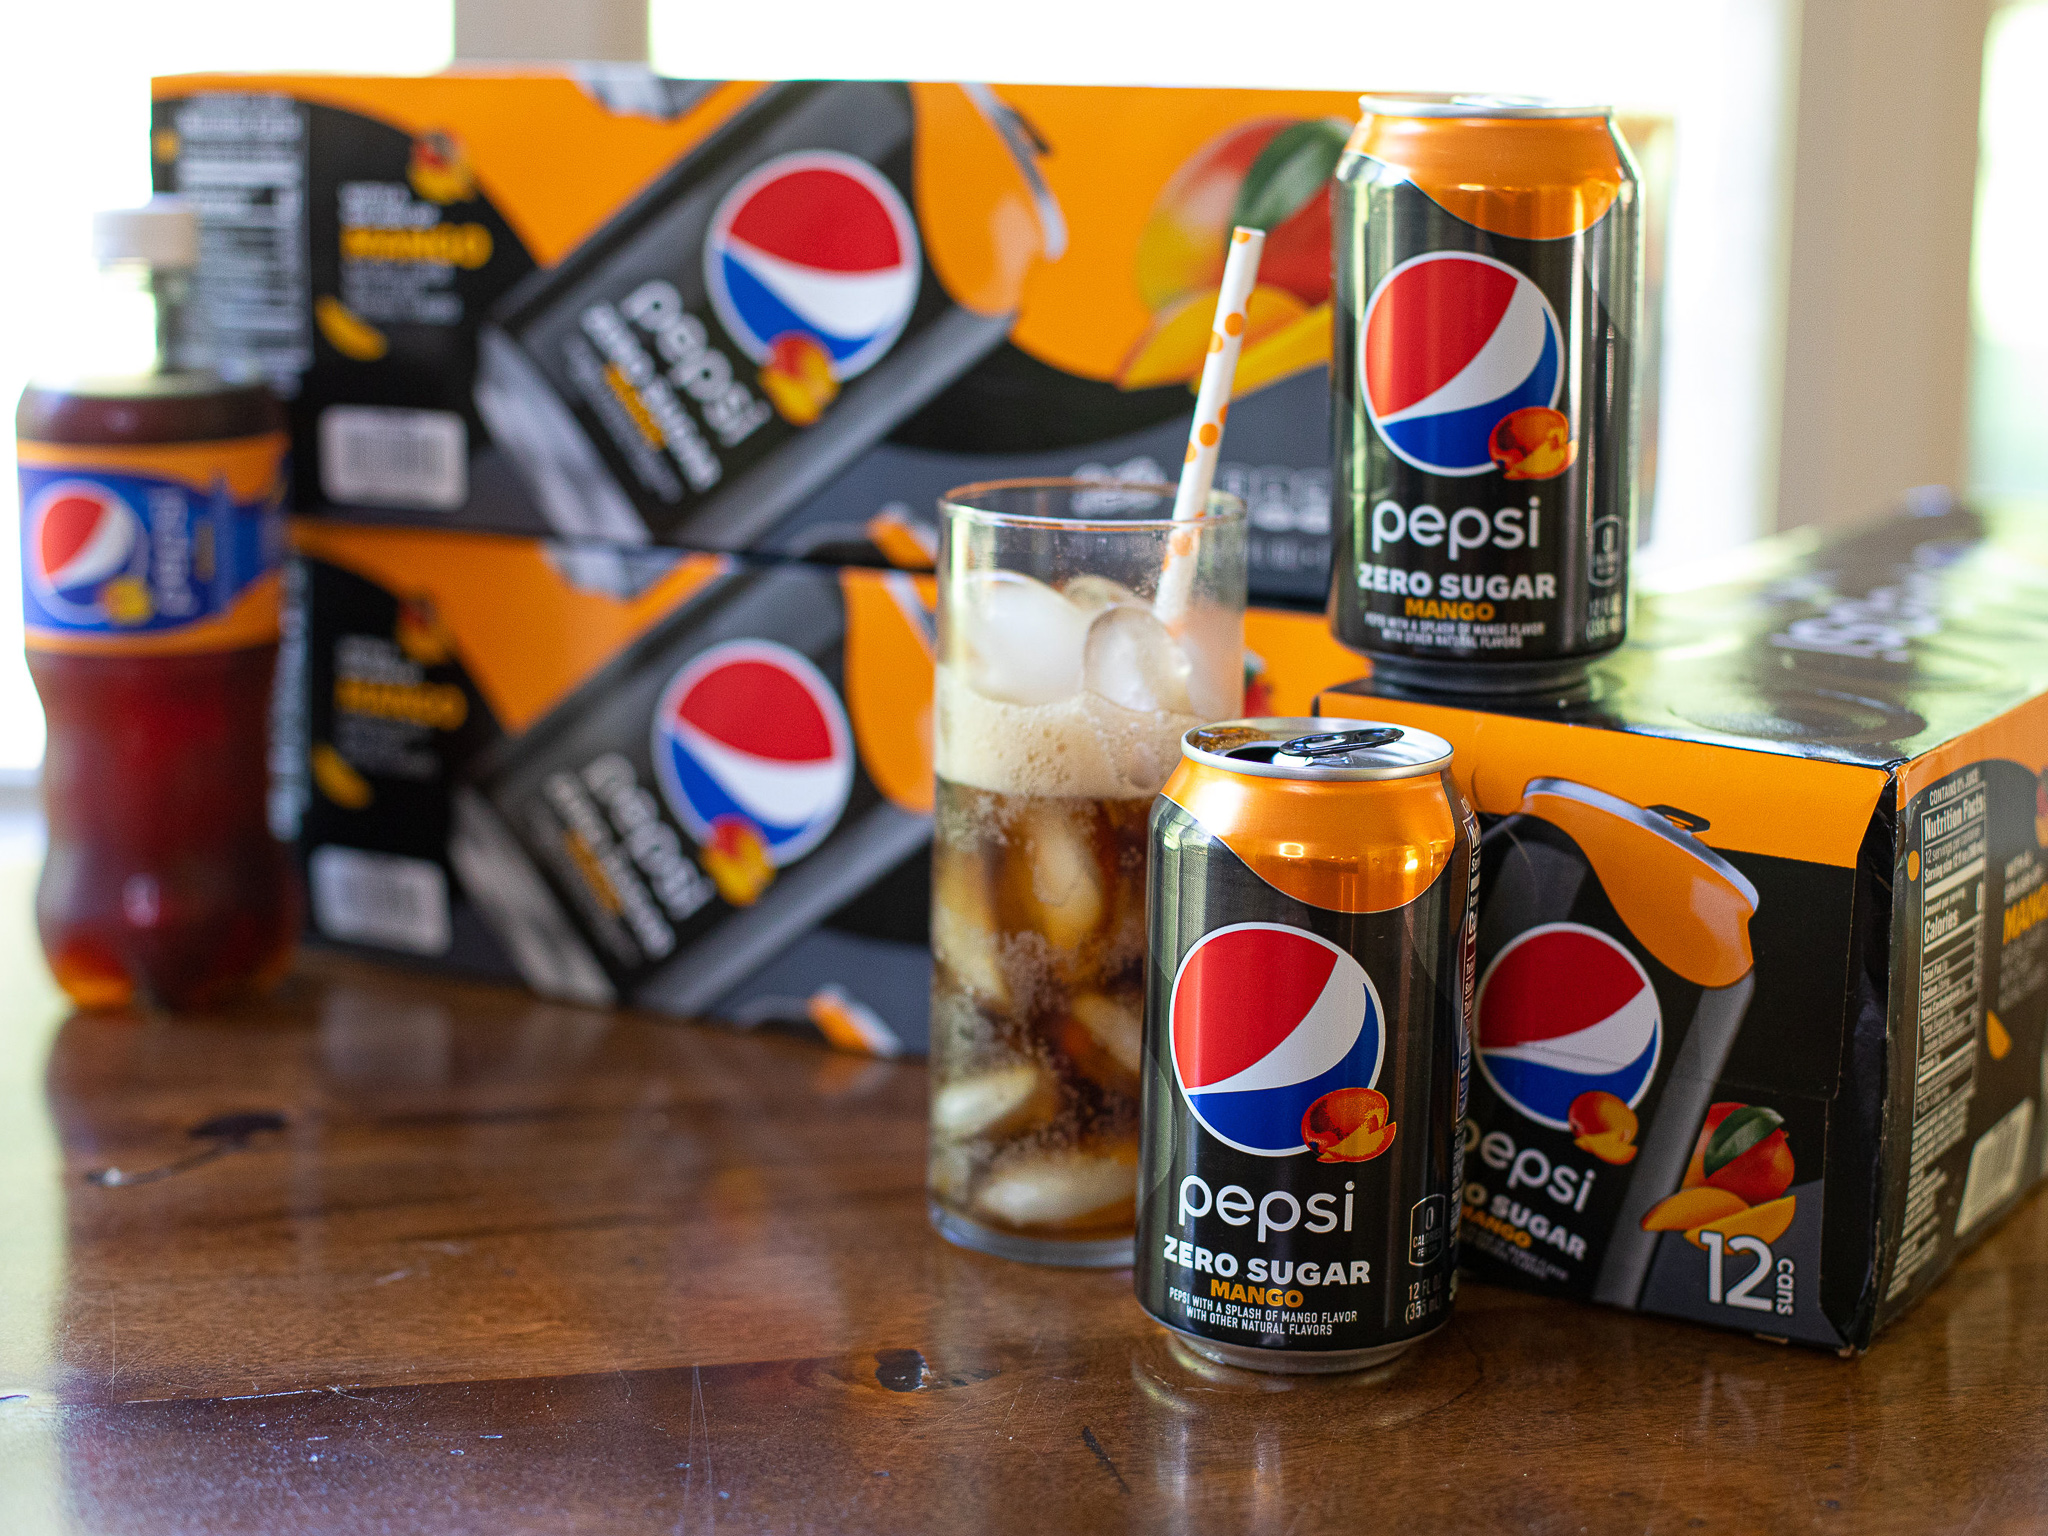 Pepsi 12-Packs As Low As $3 At Publix